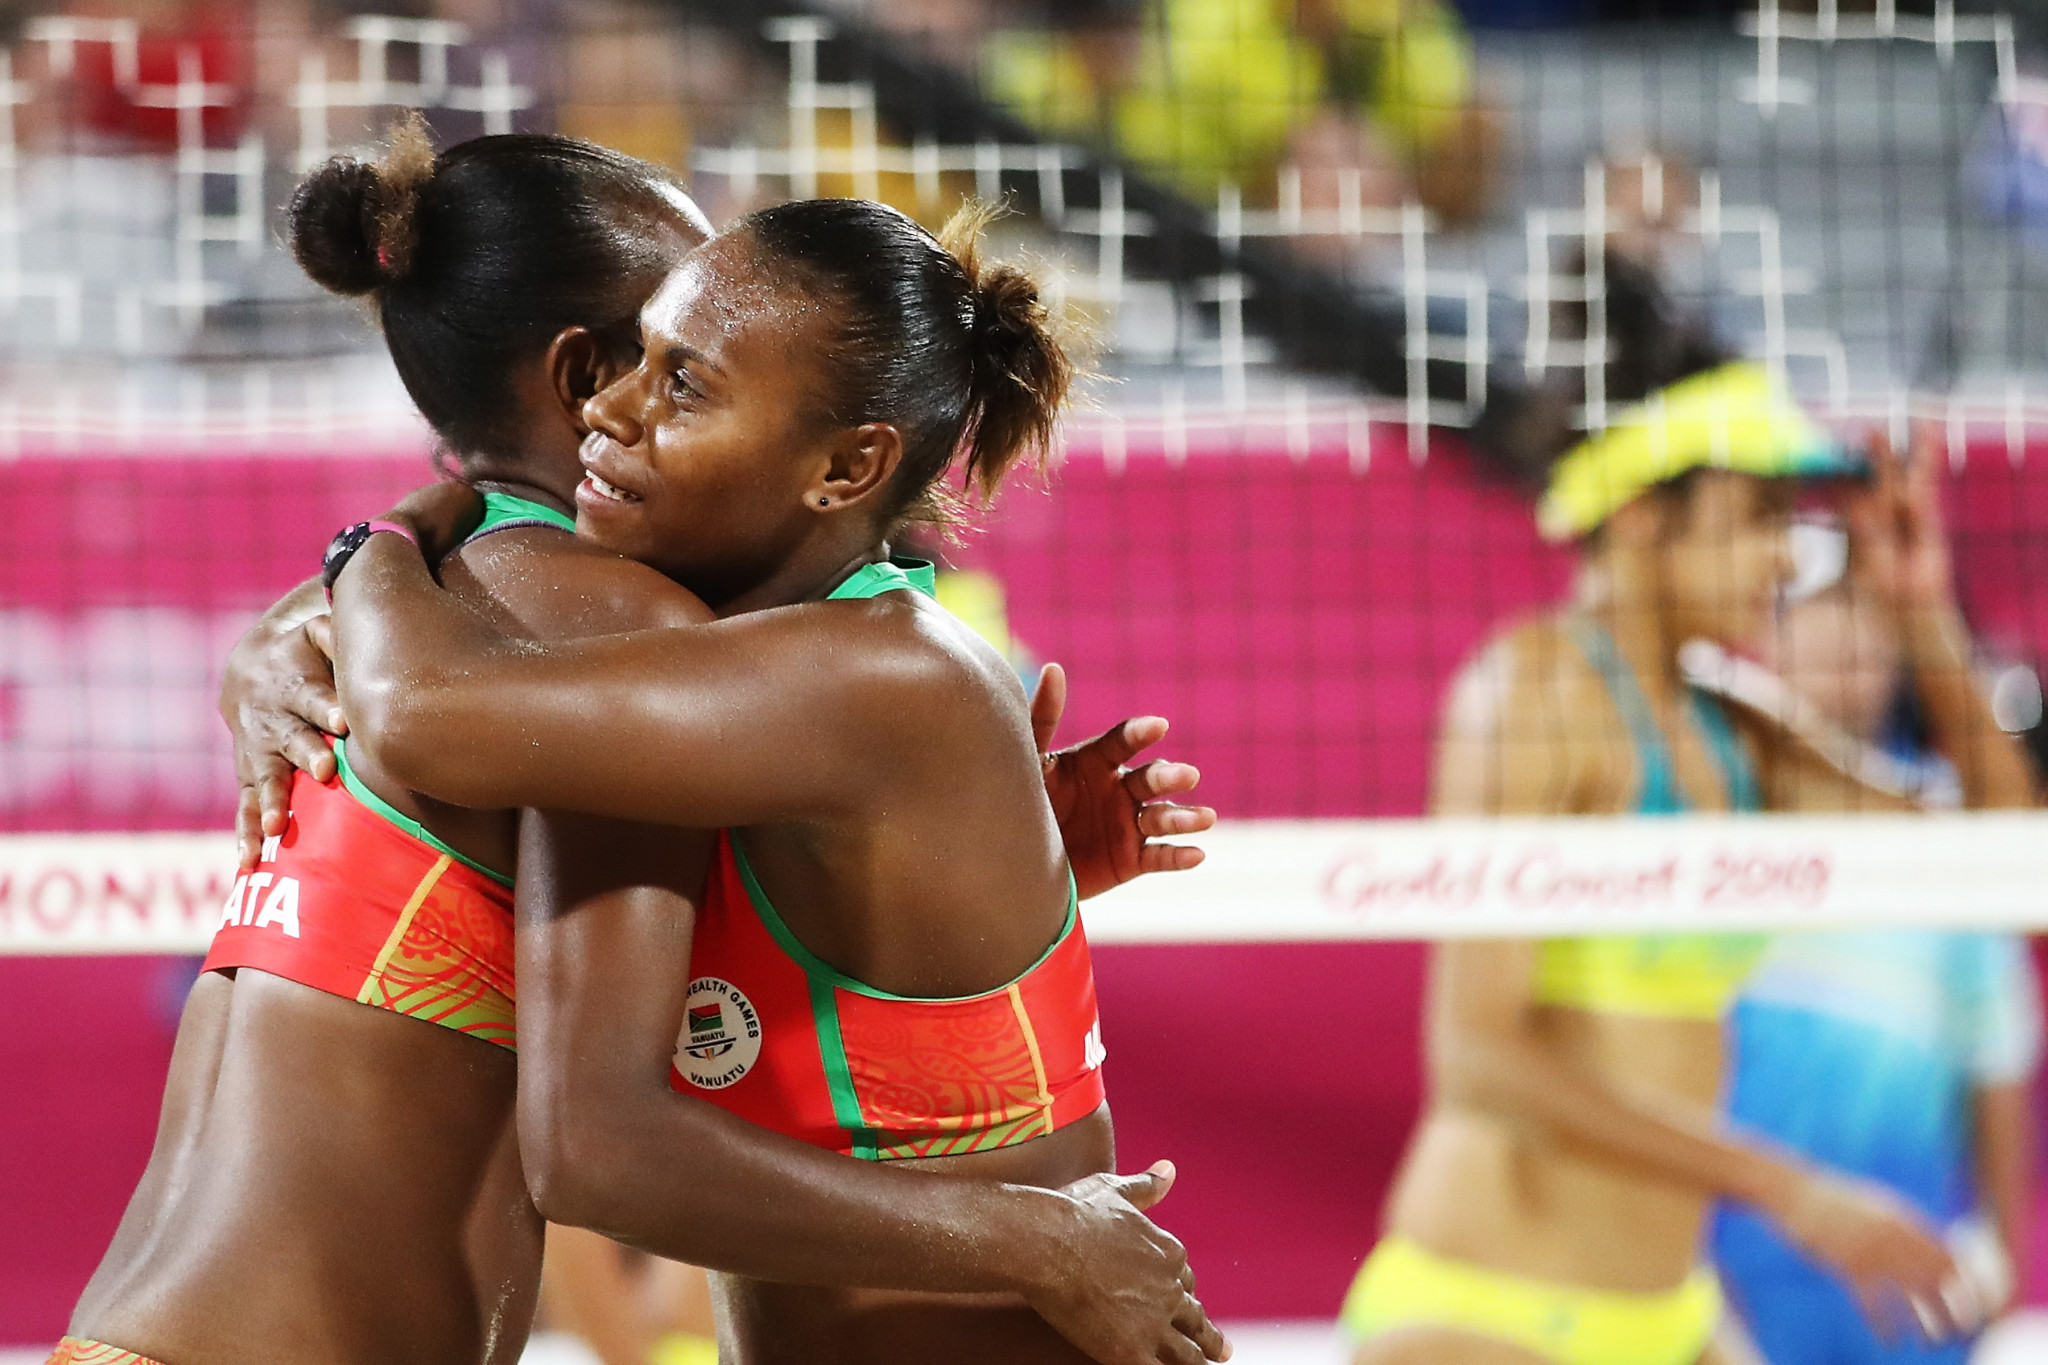 Female athletes were responsible for both of Vanuatu's bronze medals won at the Gold Coast 2018 Commonwealth Games ©Getty Images